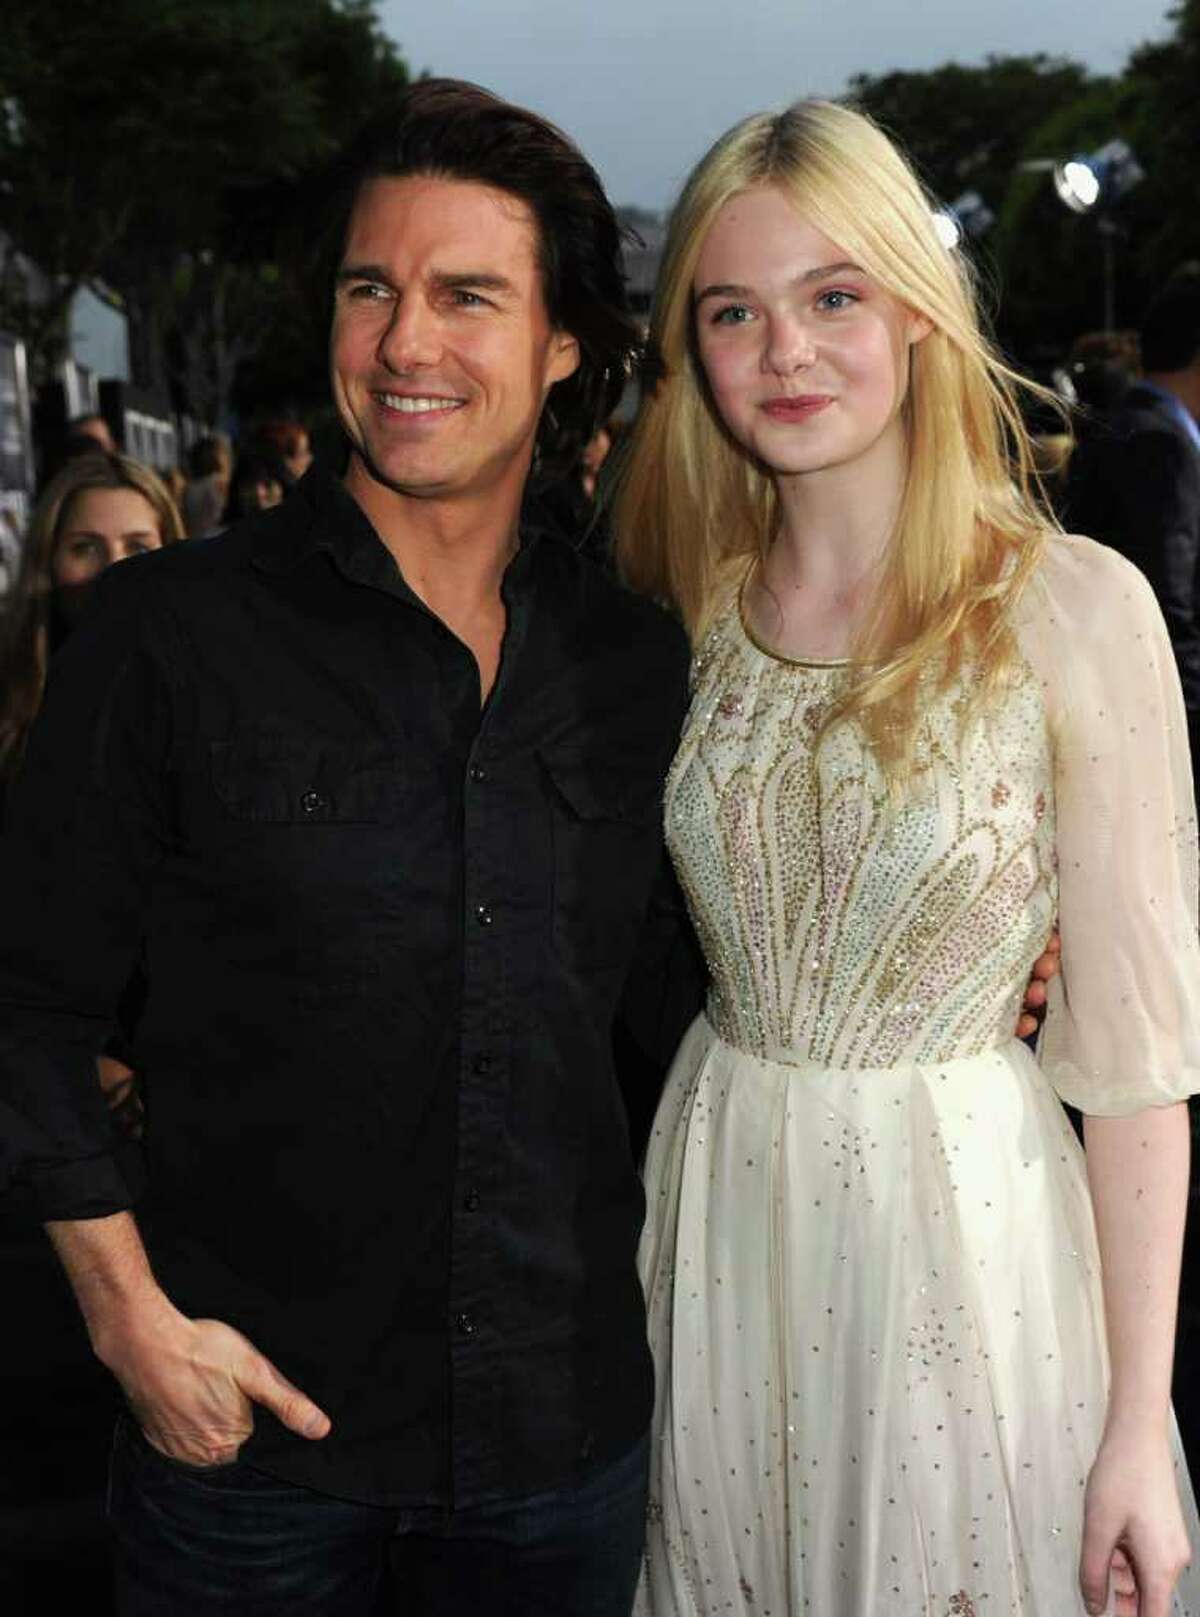 Actors Tom Cruise and Elle Fanning arrive at the premiere of Paramount Pictures' "Super 8" at Regency Village Theatre in Westwood, California.